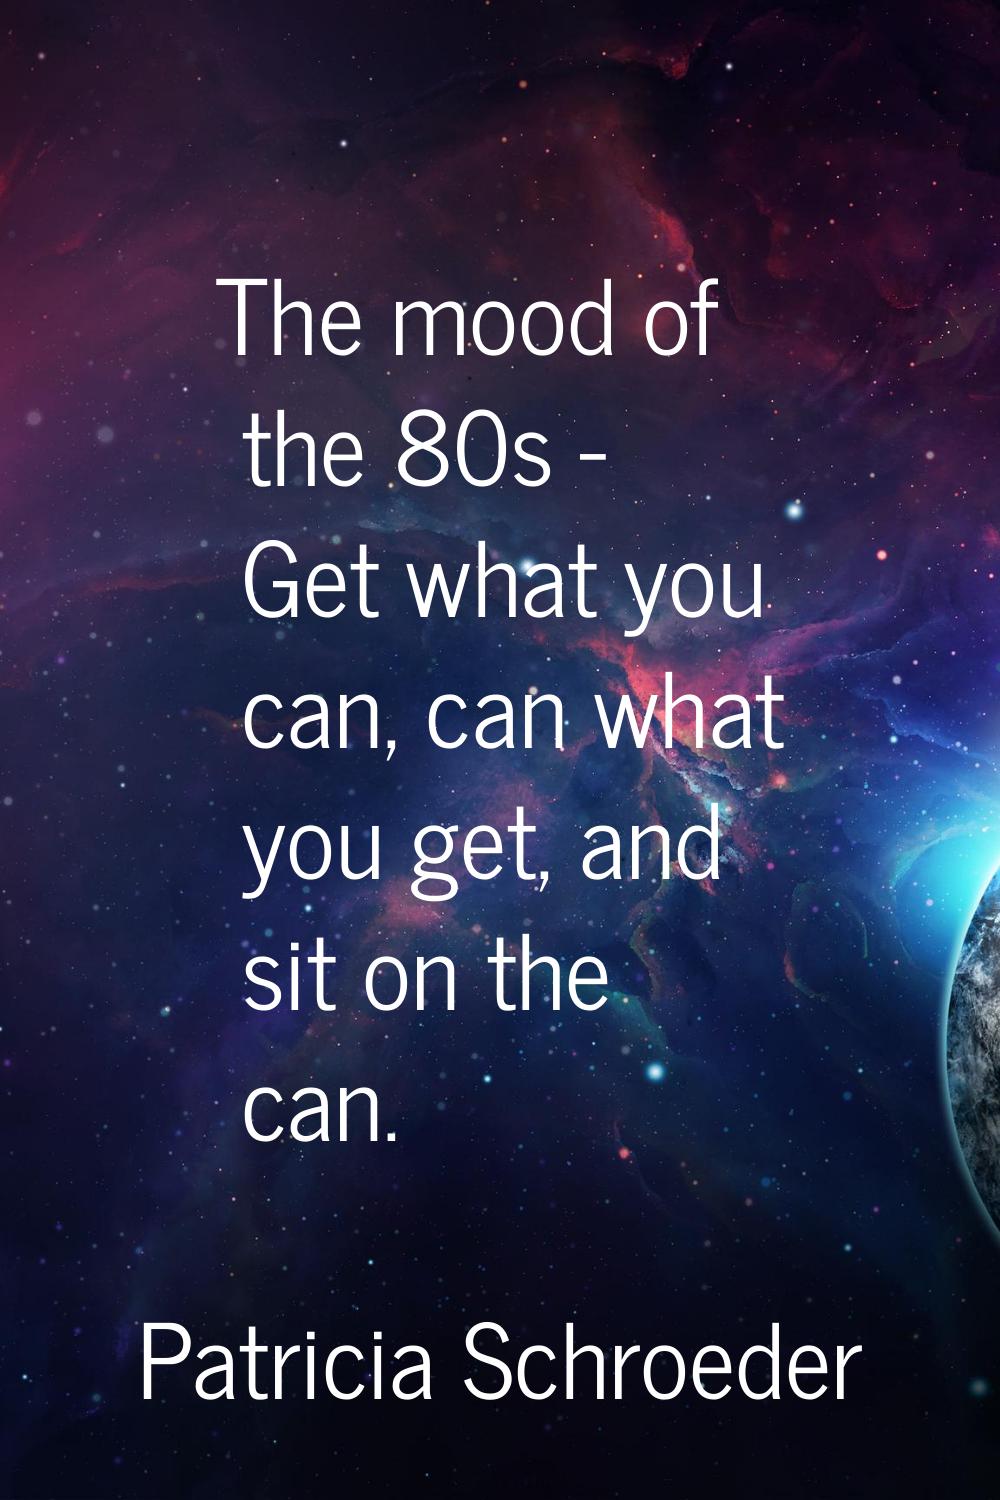 The mood of the 80s - Get what you can, can what you get, and sit on the can.